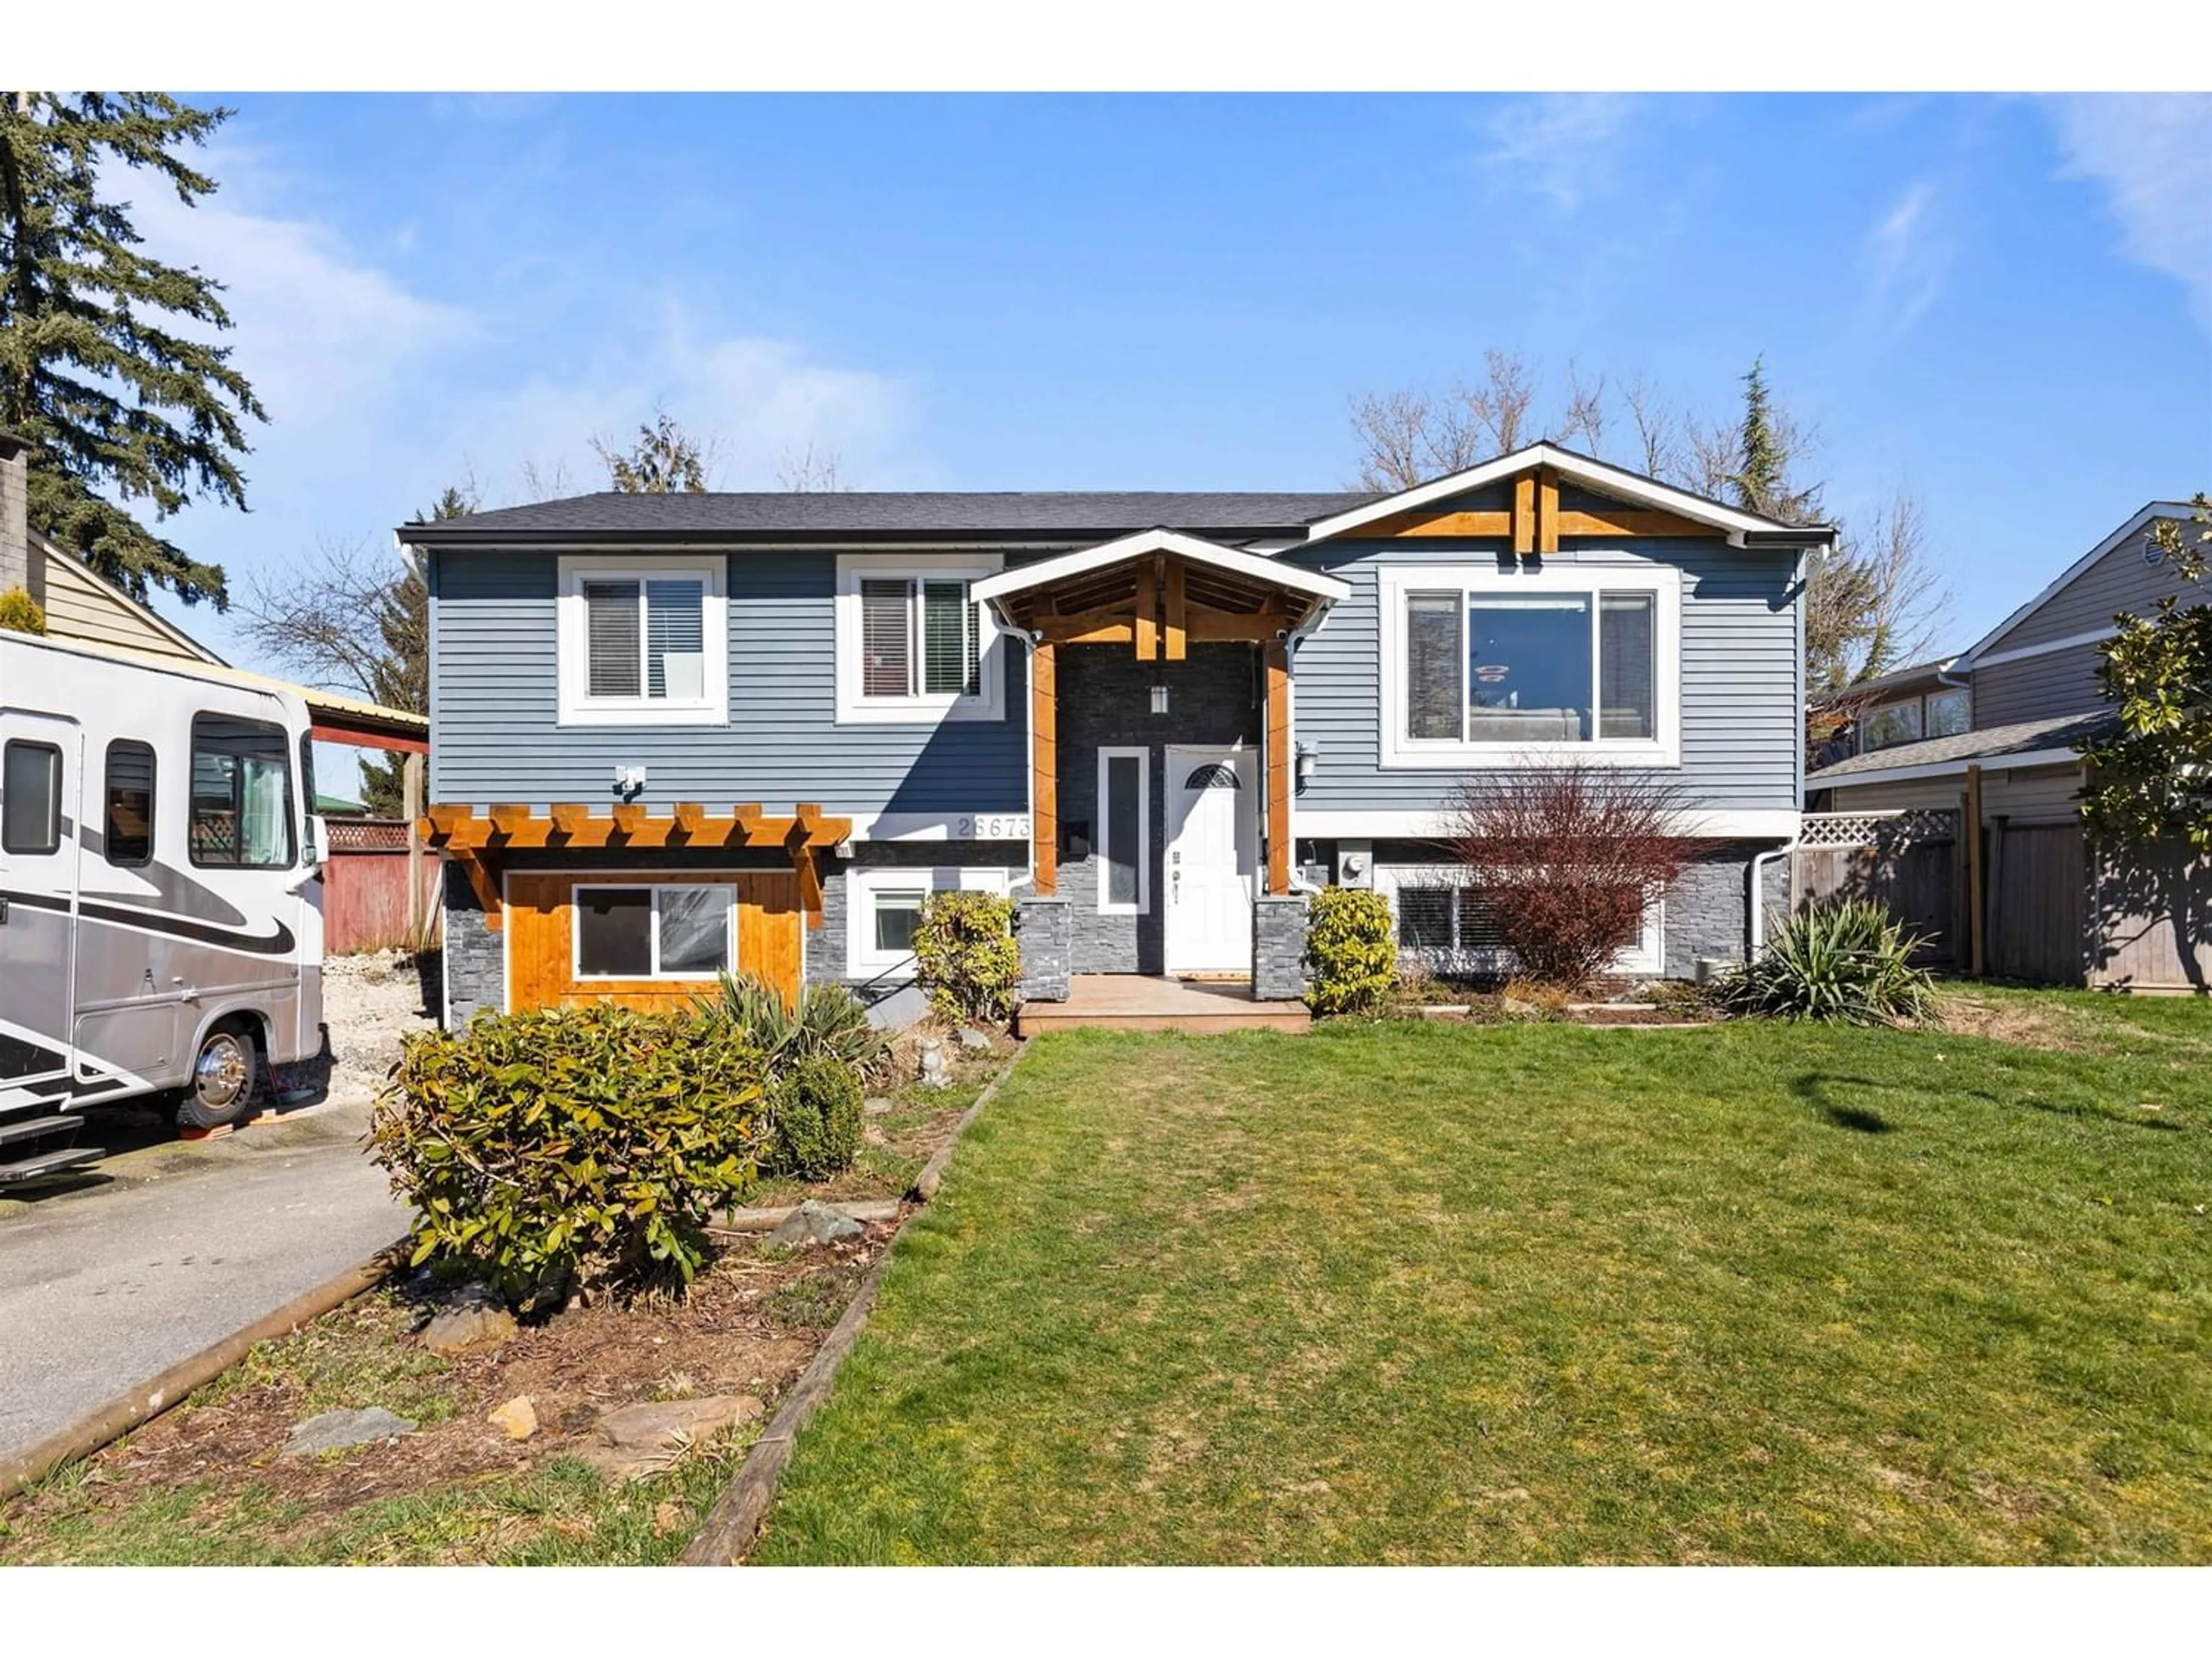 Frontside or backside of a home for 26673 32A AVENUE, Langley British Columbia V4W3G3